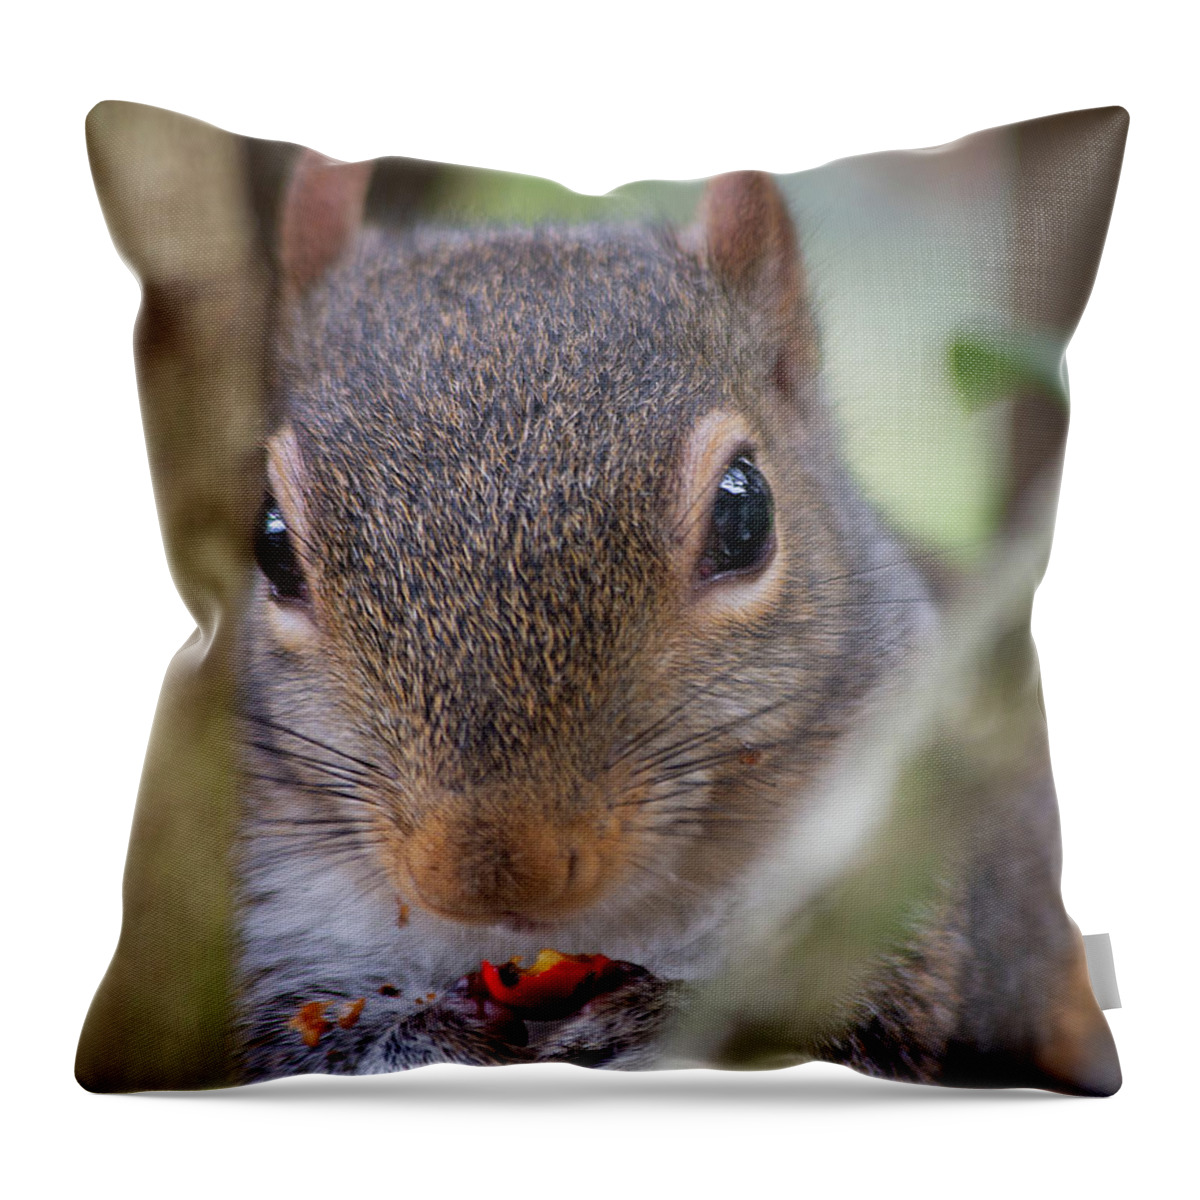 Mammal Throw Pillow featuring the photograph Winter Snack by Gina Fitzhugh